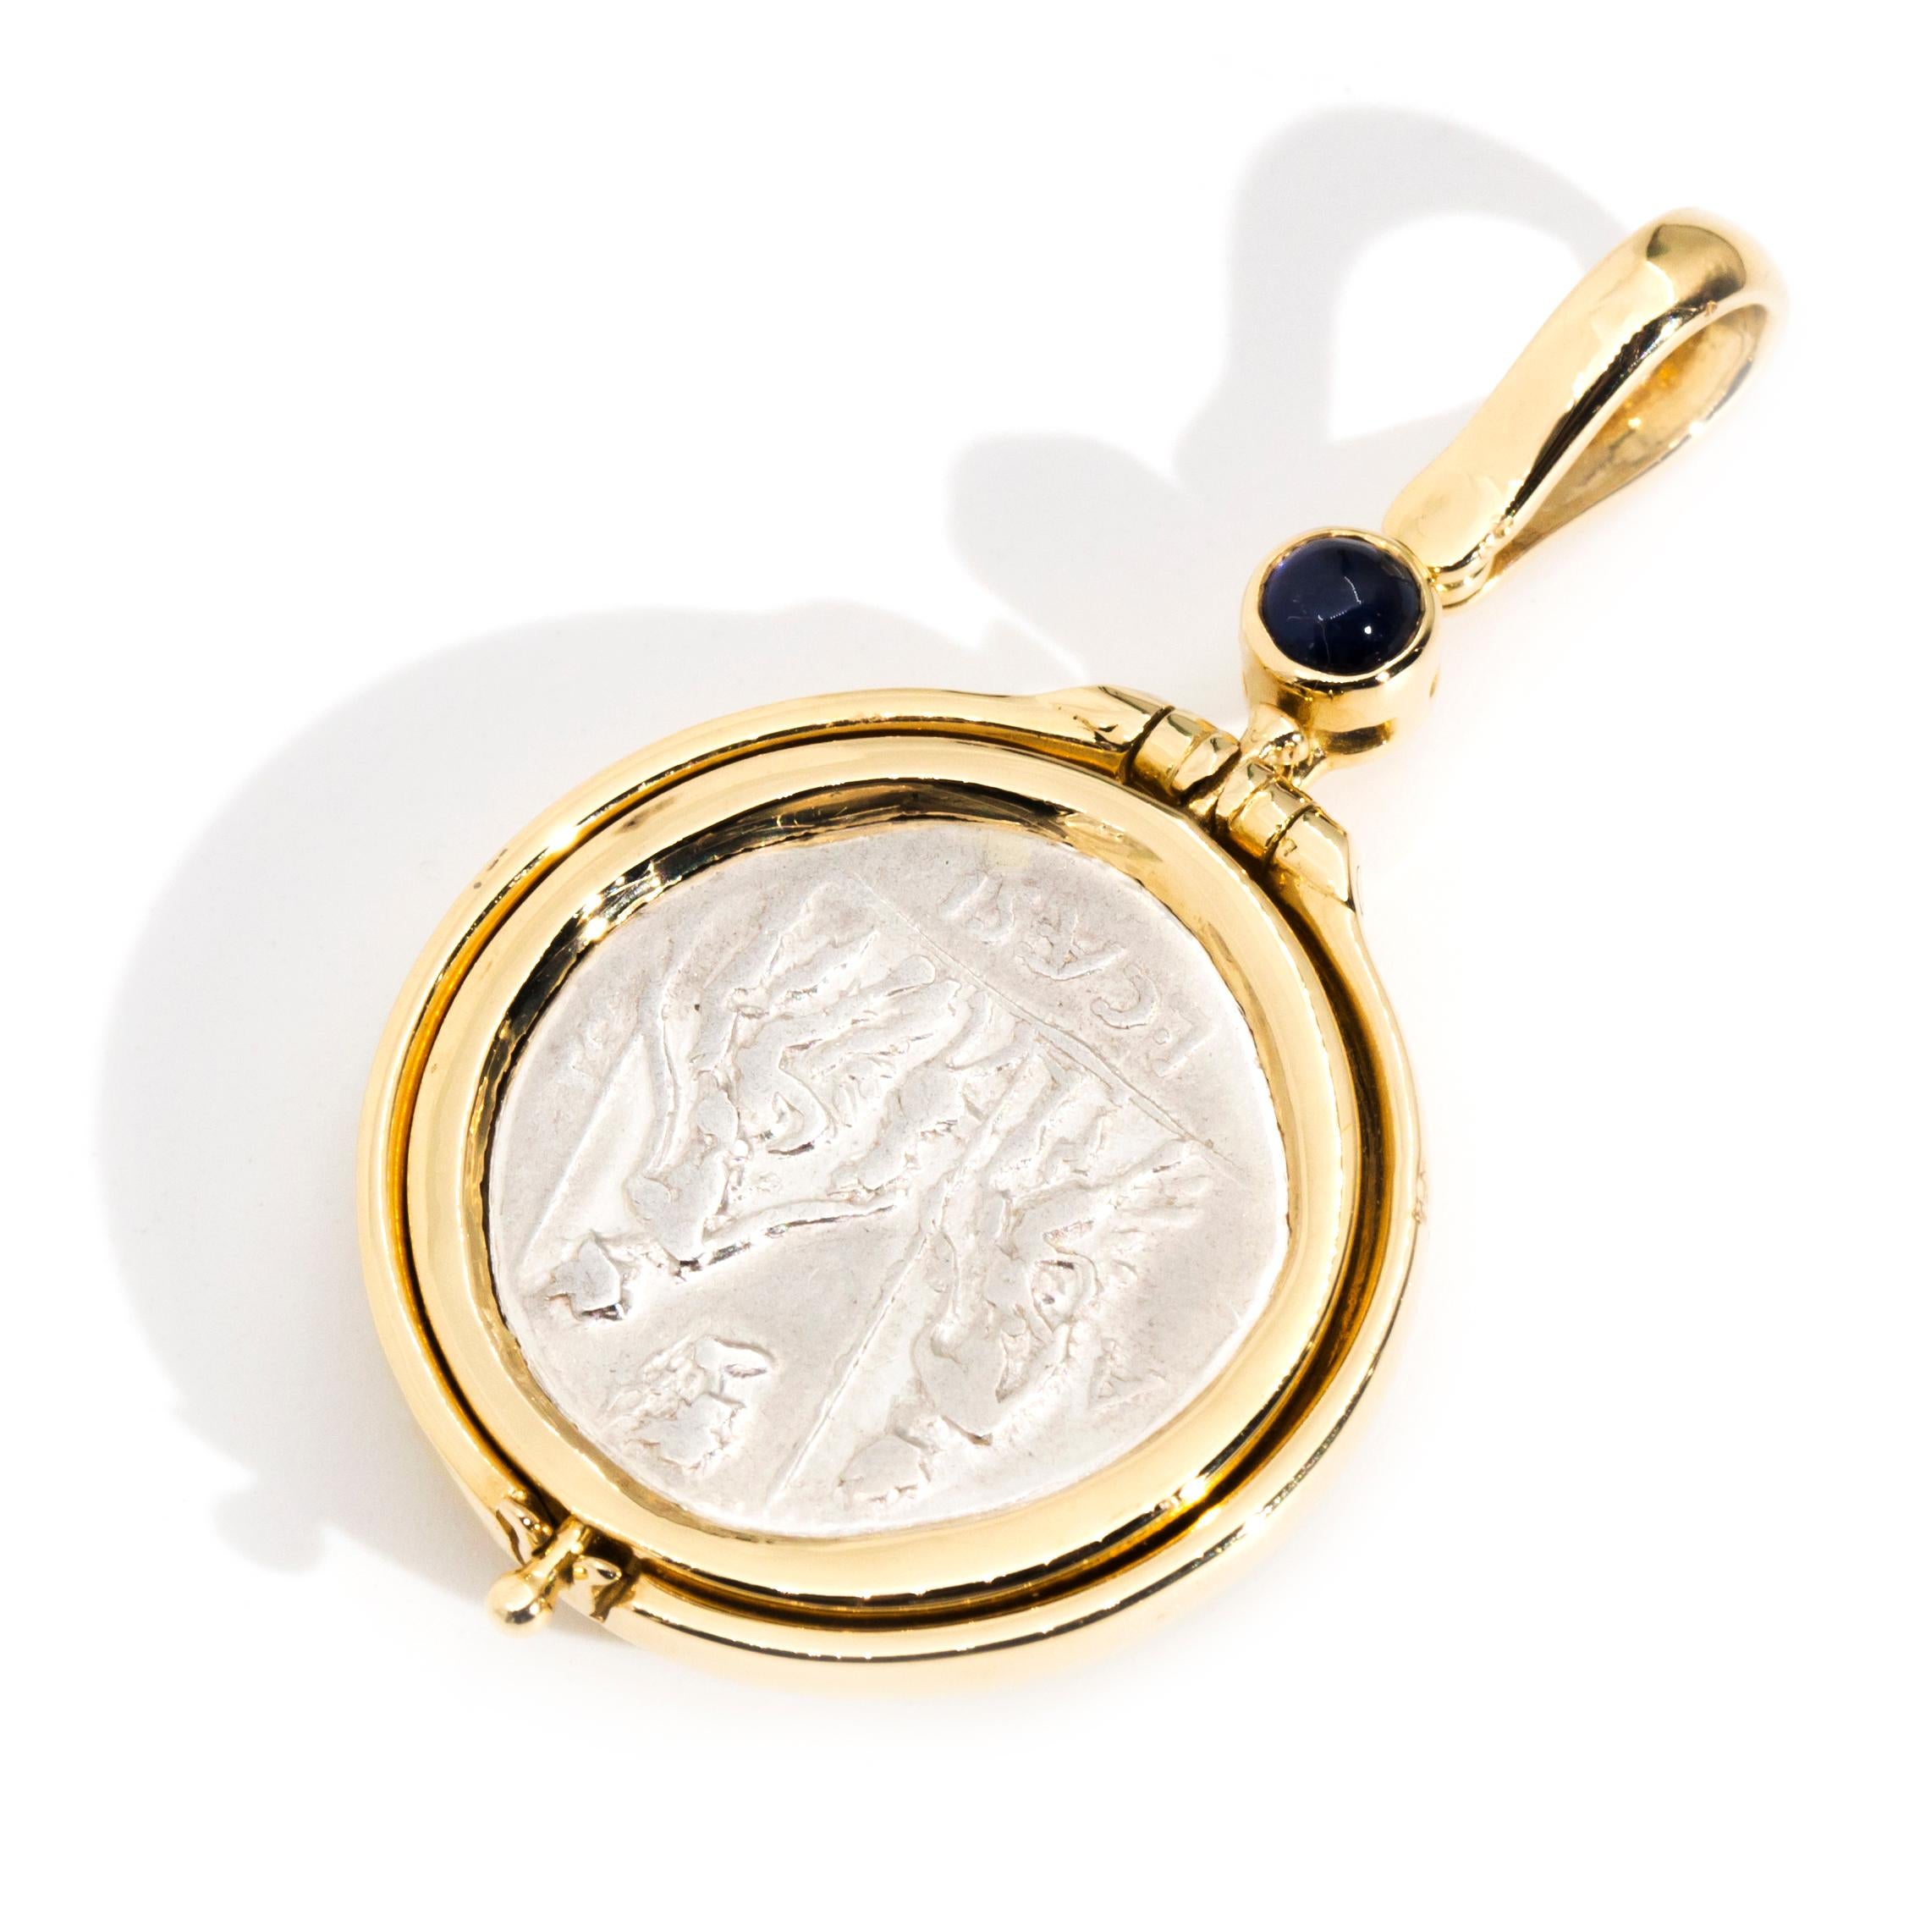 Cabochon Vejovis and Two Lares Ancient Coin Flip Style Pendant 18 Carat Yellow Gold